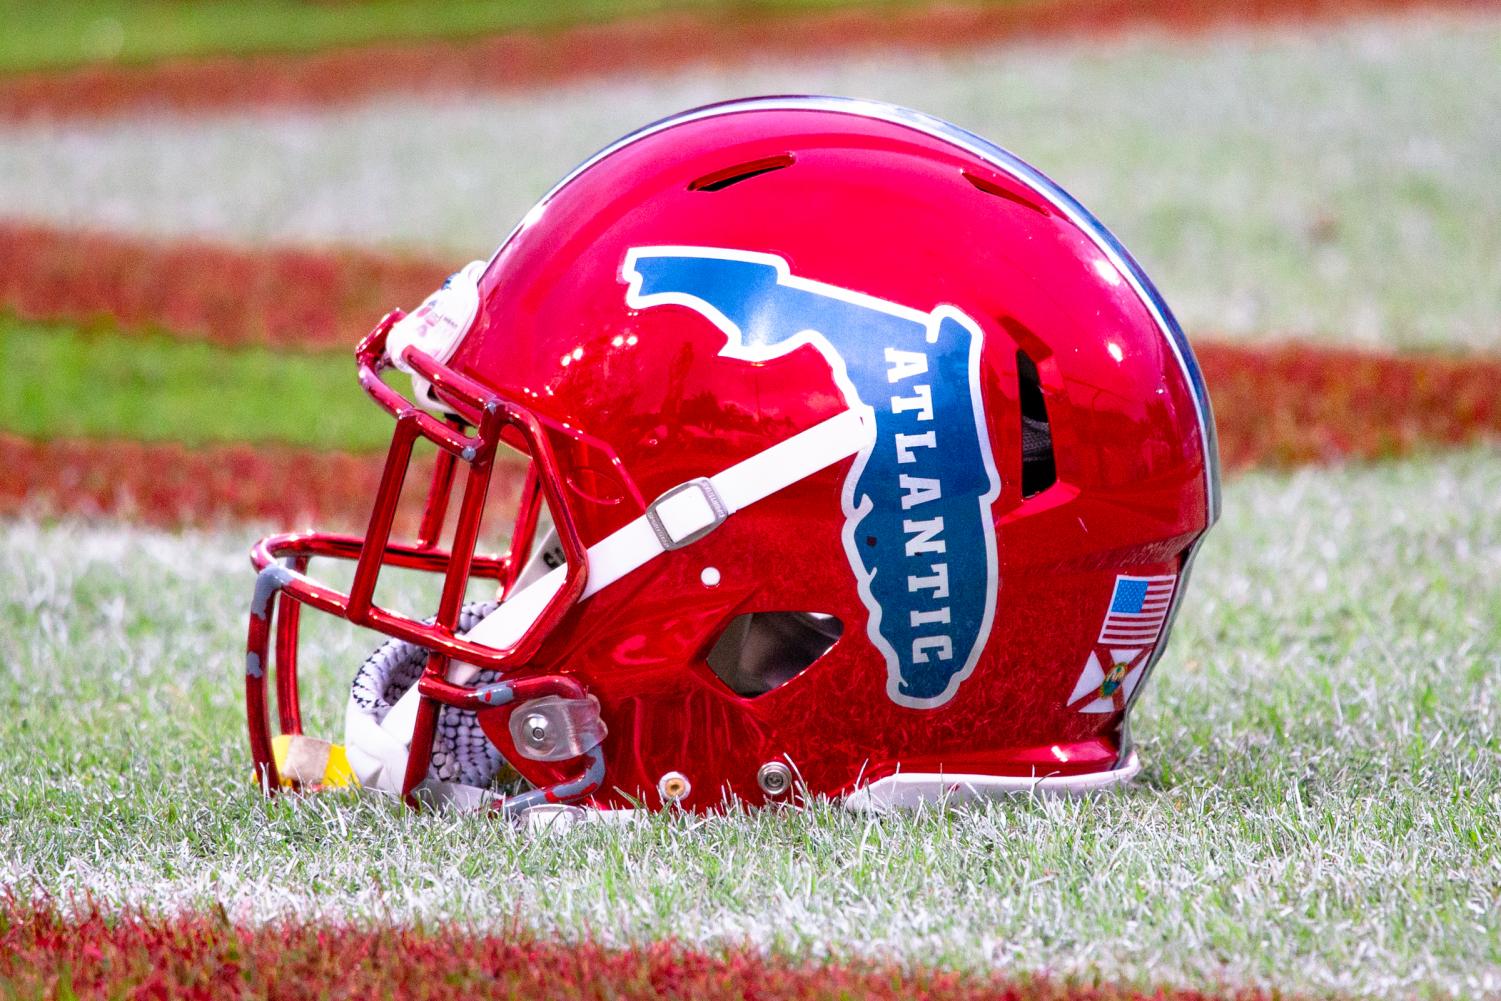 Deion Sanders Jr. commits to play receiver at SMU 